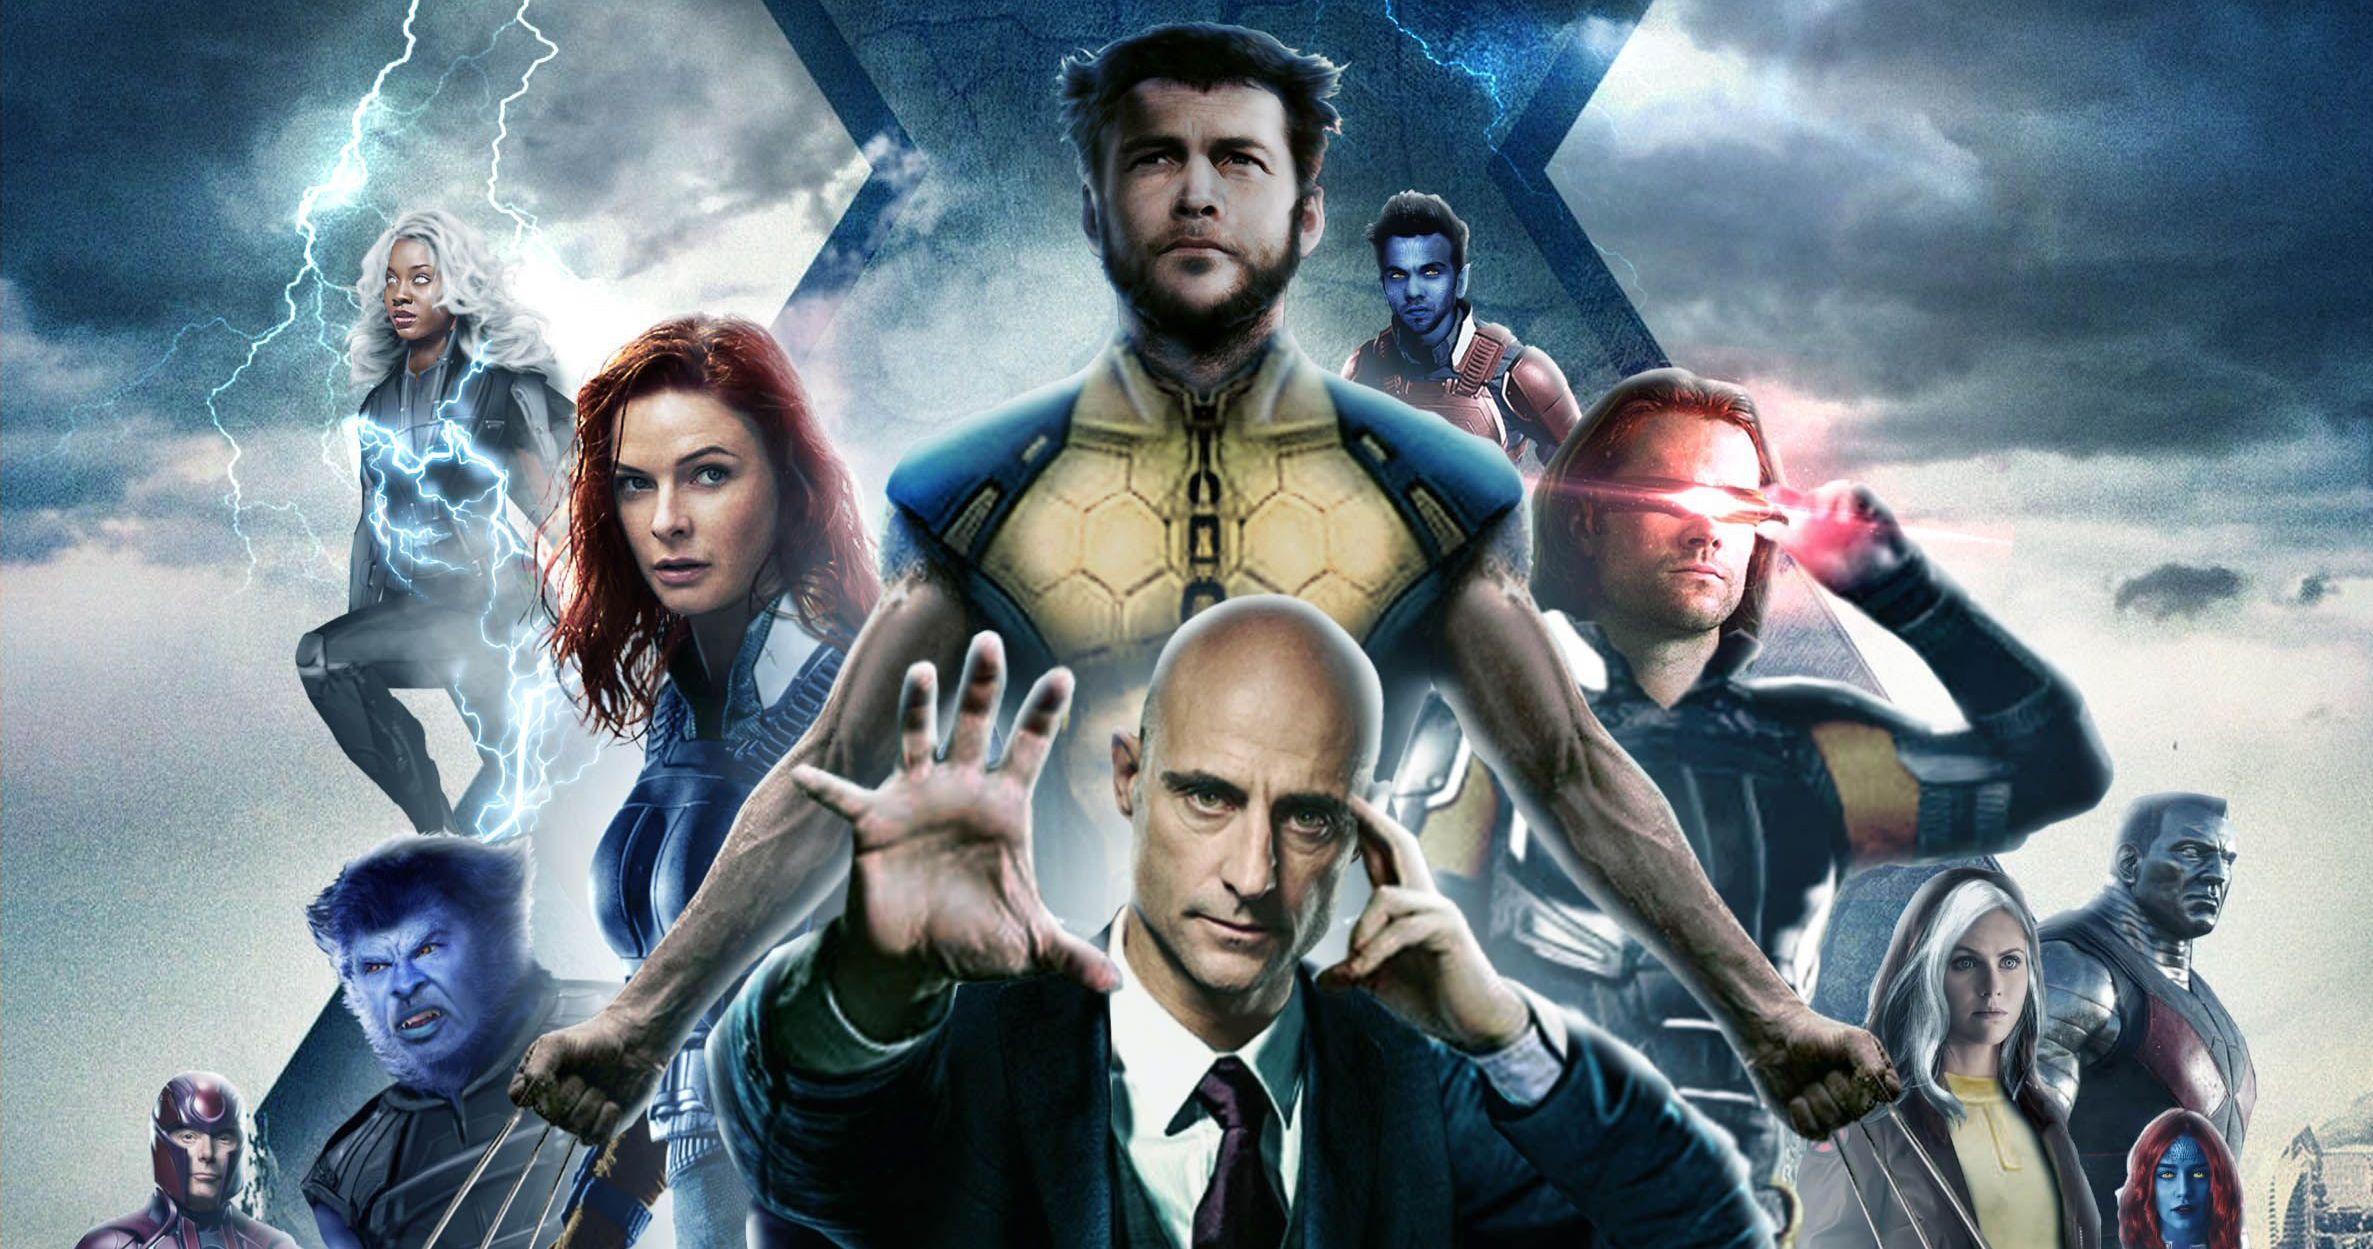 XMen MCU Talks Have Been Long and Ongoing Amongst Marvel Studios Team